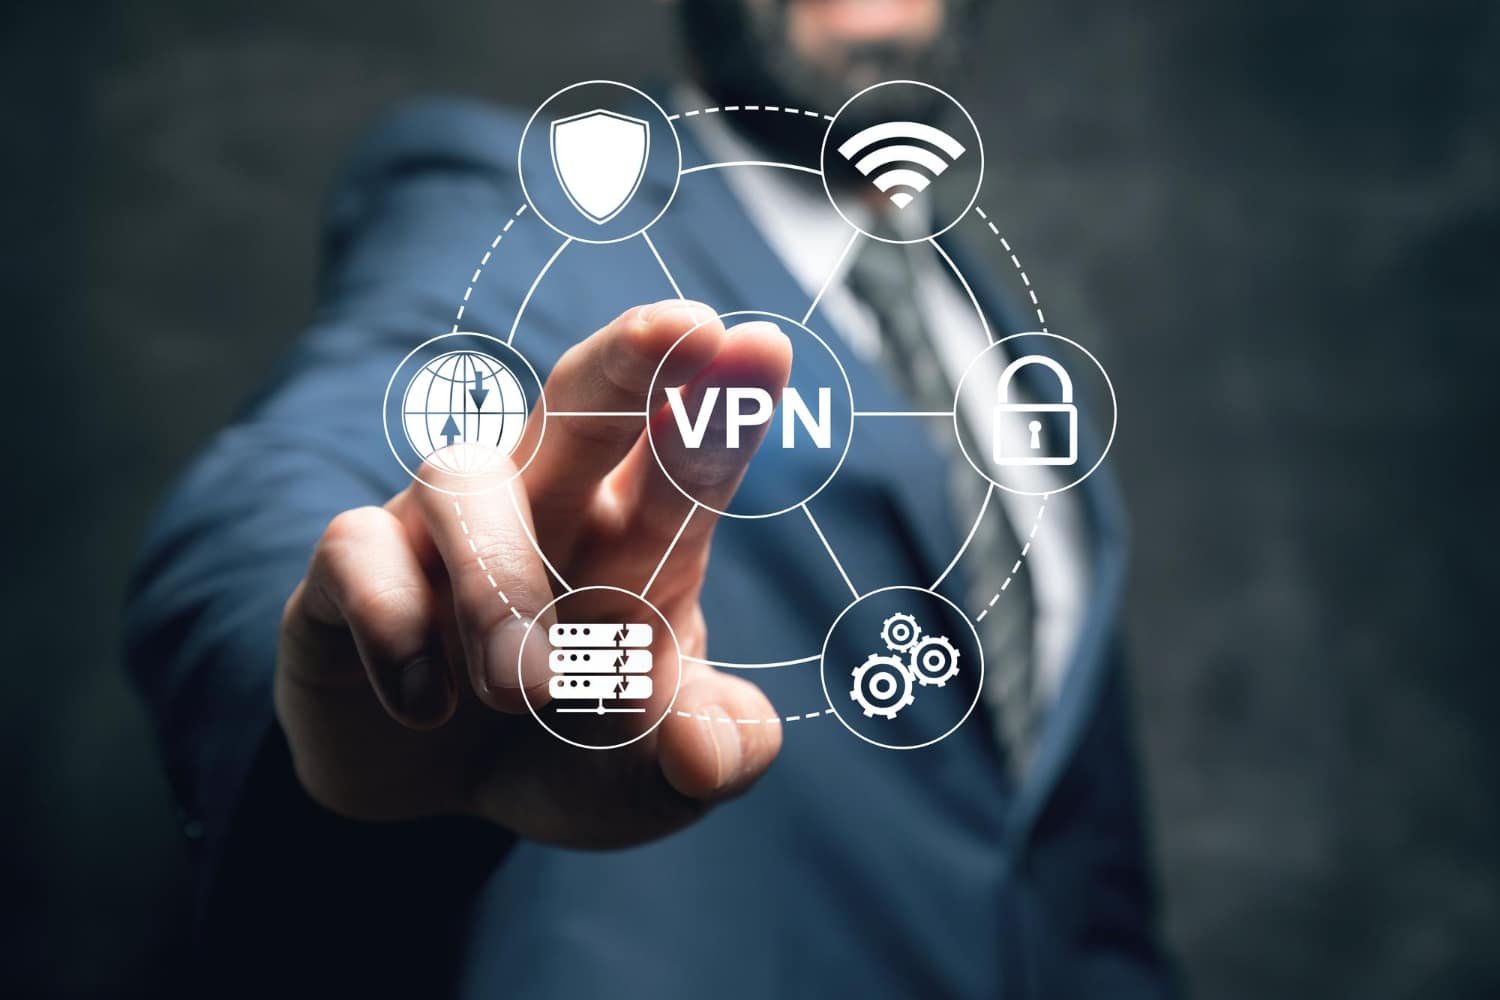 Enhance Your Global Content Access With ExpressVPN’s Reliable Streaming Features